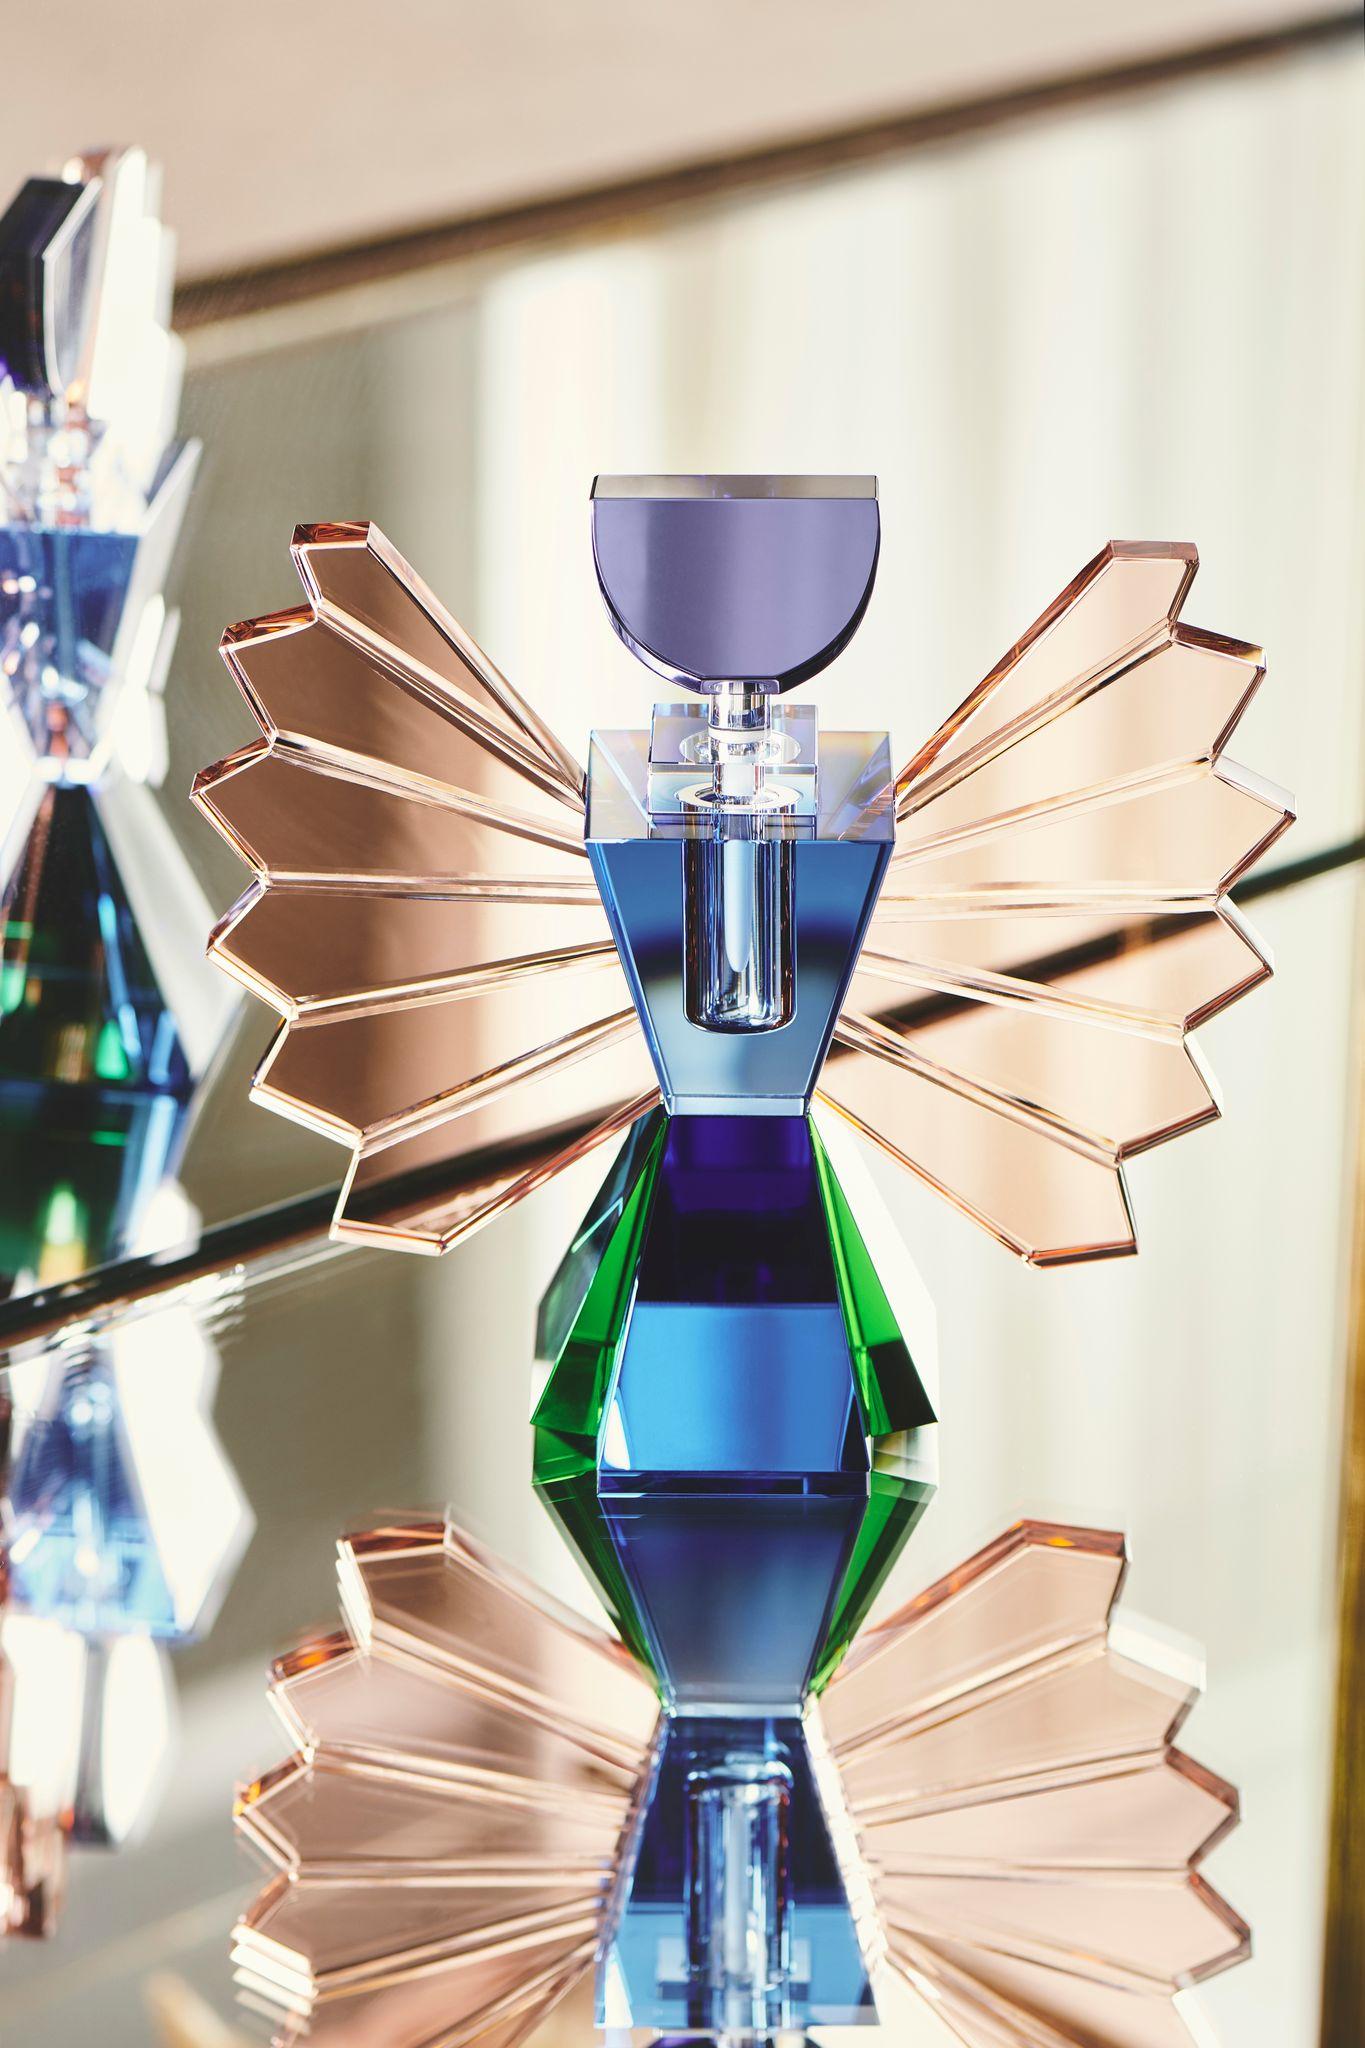 Reflections Copenhagen have created 4 fine handcut crystal perfume flacons, each carefully designed with a distinct and magical appearance.

The flacons are created to evoke the vibe of a vintage boudoir set in a contemporary context.
 